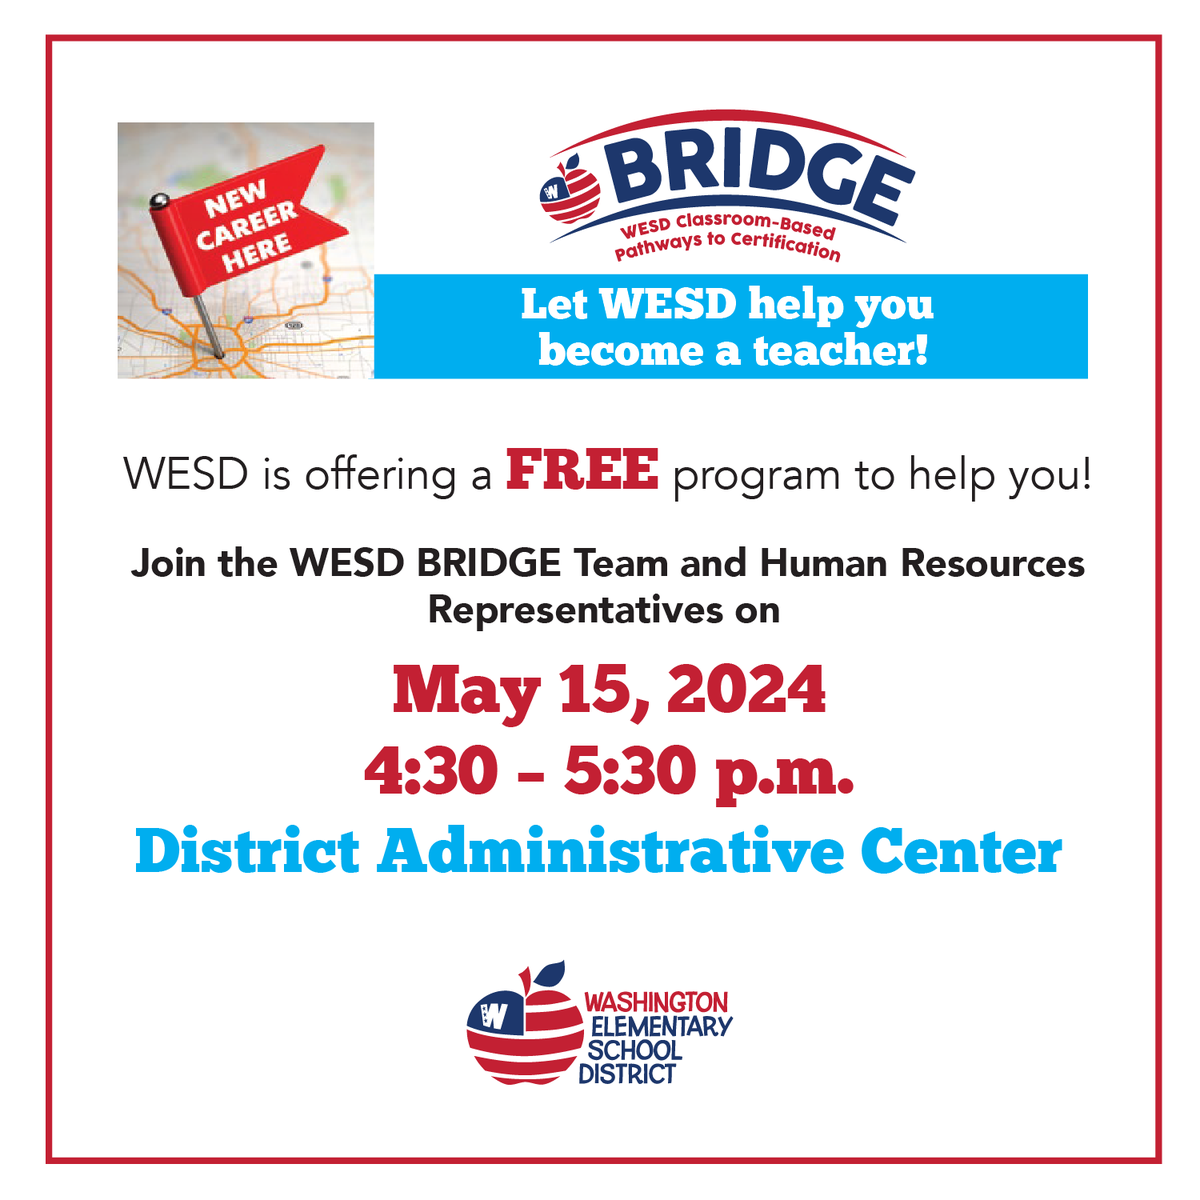 If you missed the BRIDGE Meeting yesterday, the WESD has another opportunity on May 15 at the Administrative Center! Learn about our free program that can help you earn your teacher certification while working as a full-time teacher. To RSVP, please call 602-347-2622. #WESDFamily